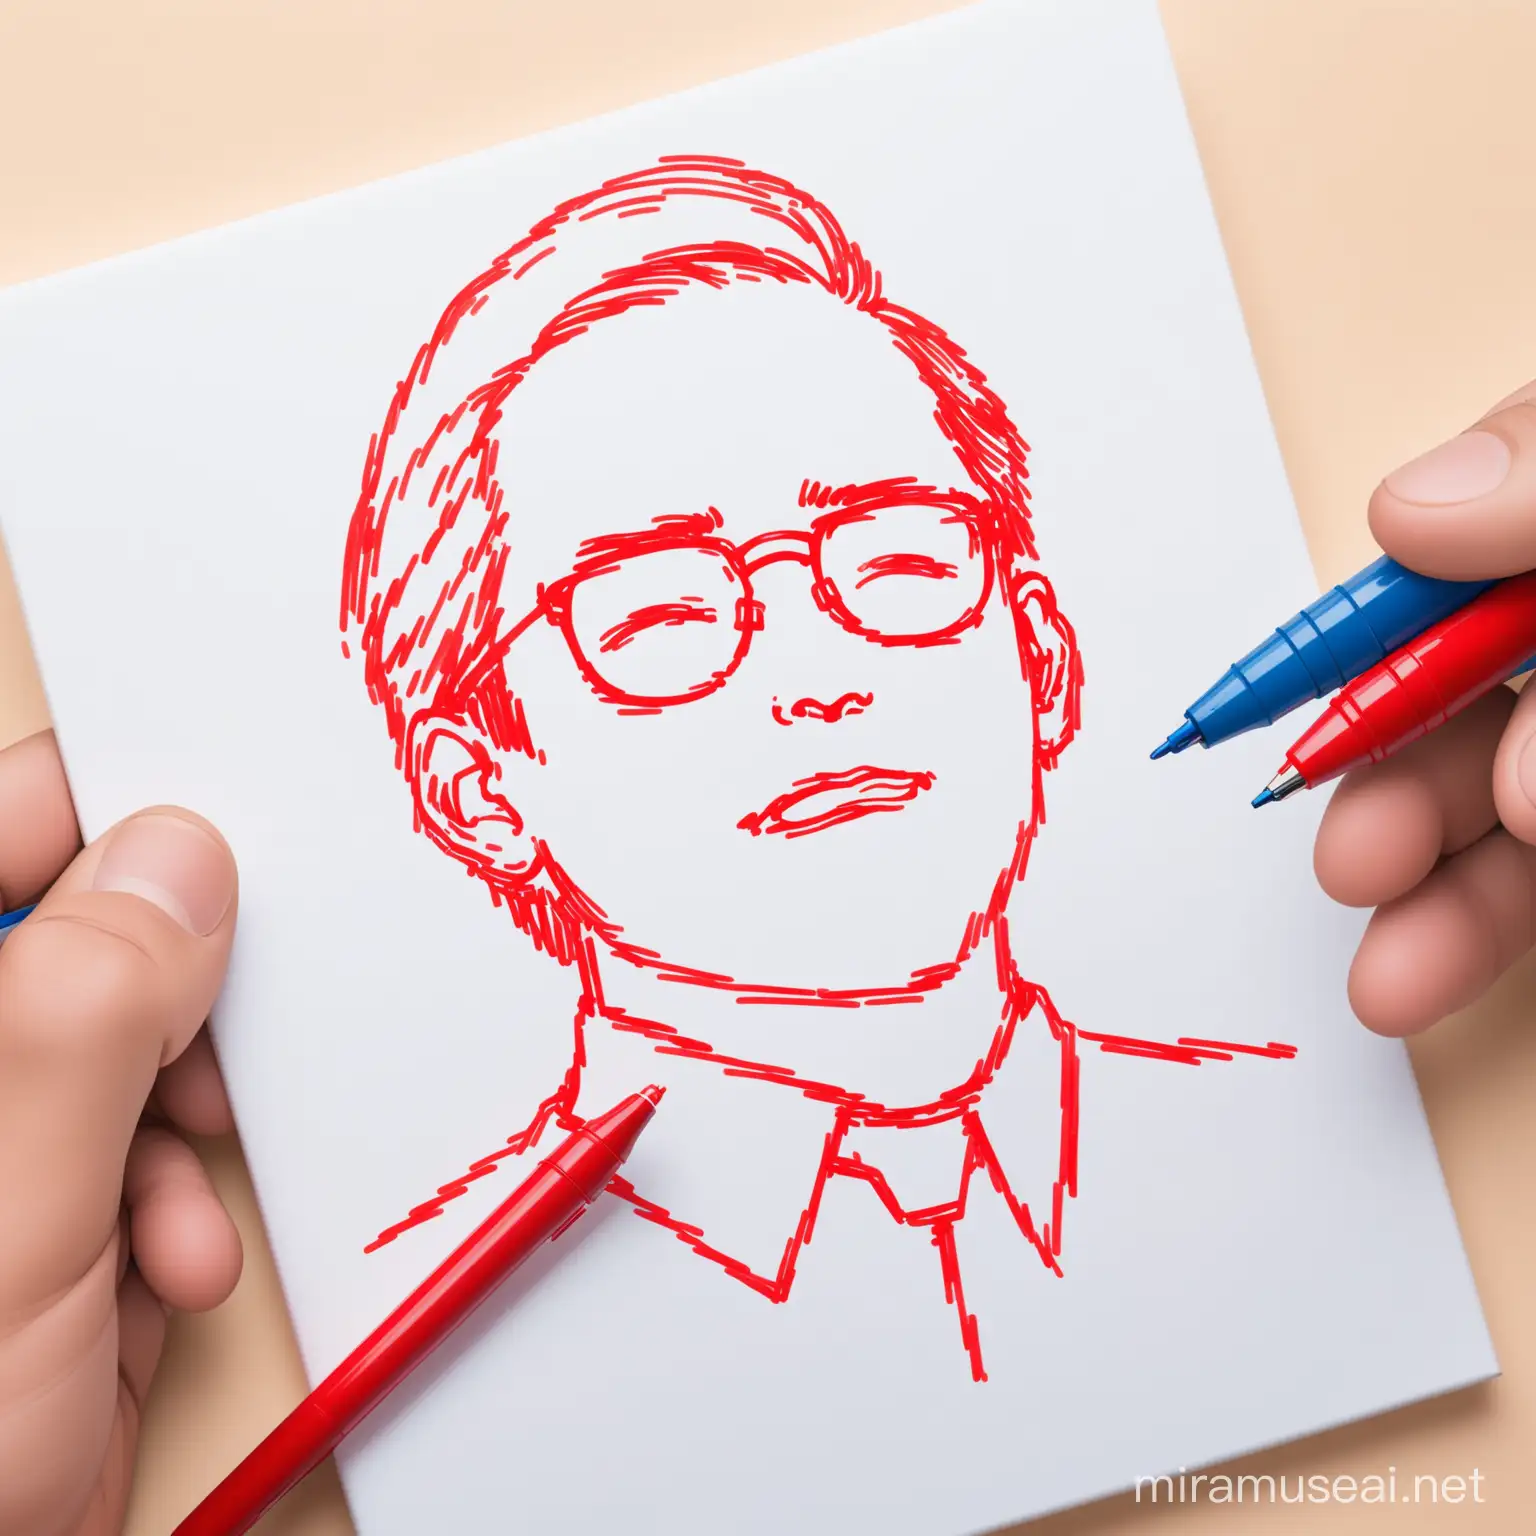 Artistic Man Creating Vibrant Art with Red and Blue Pens